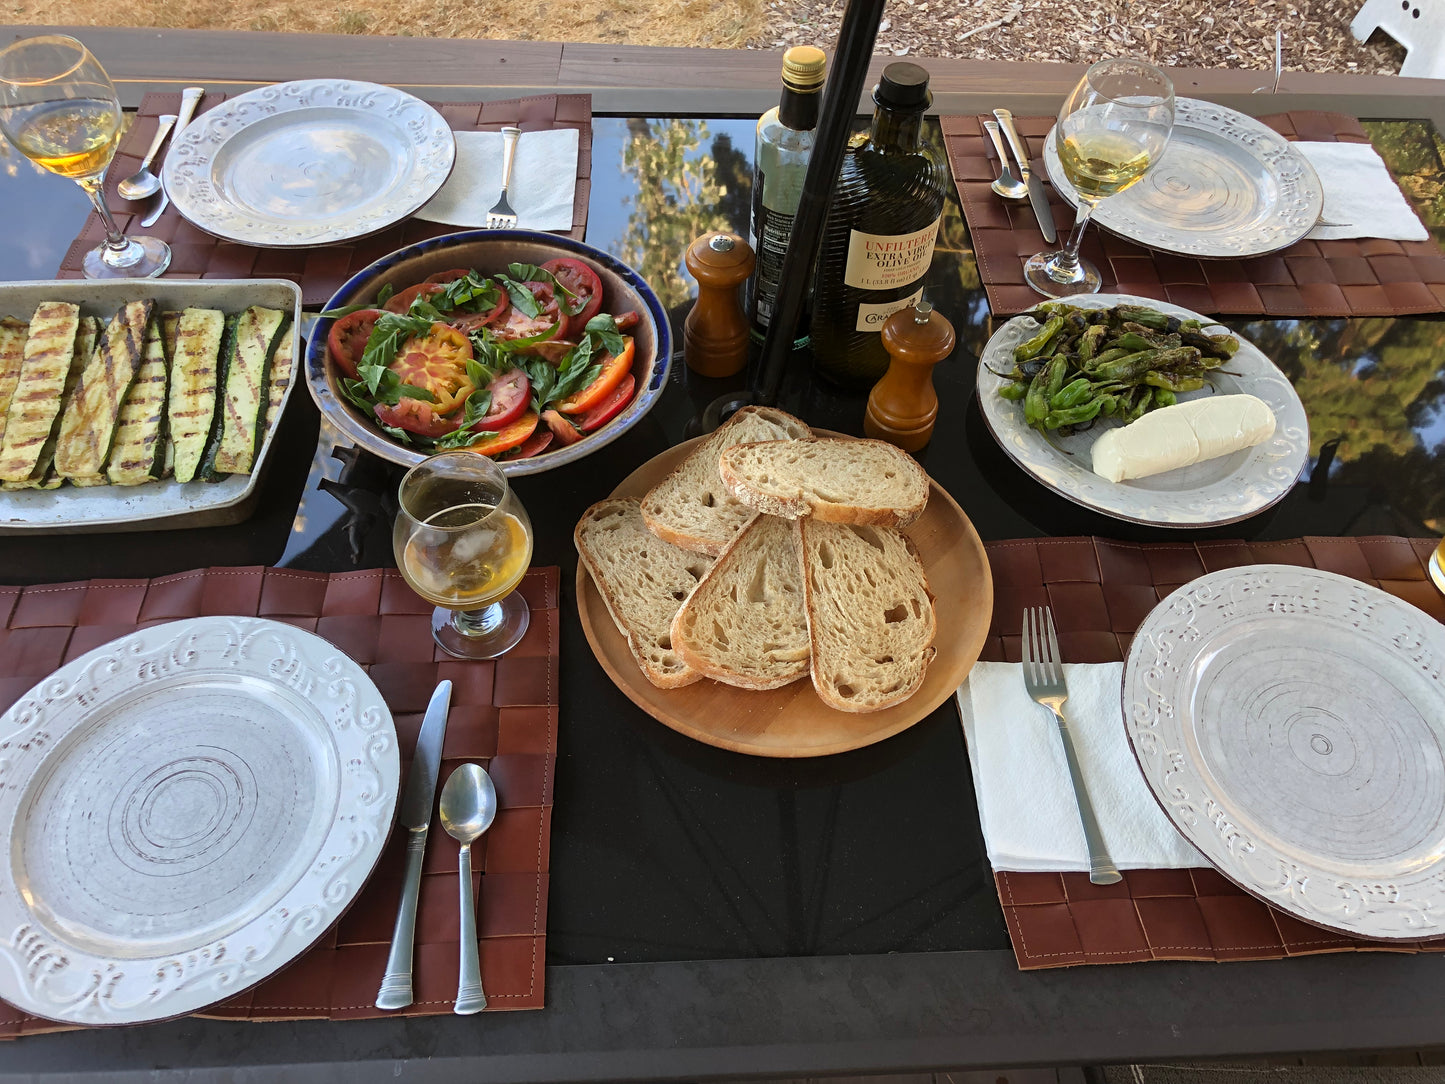 Bountiful outdoor table set with woven leather placemats.